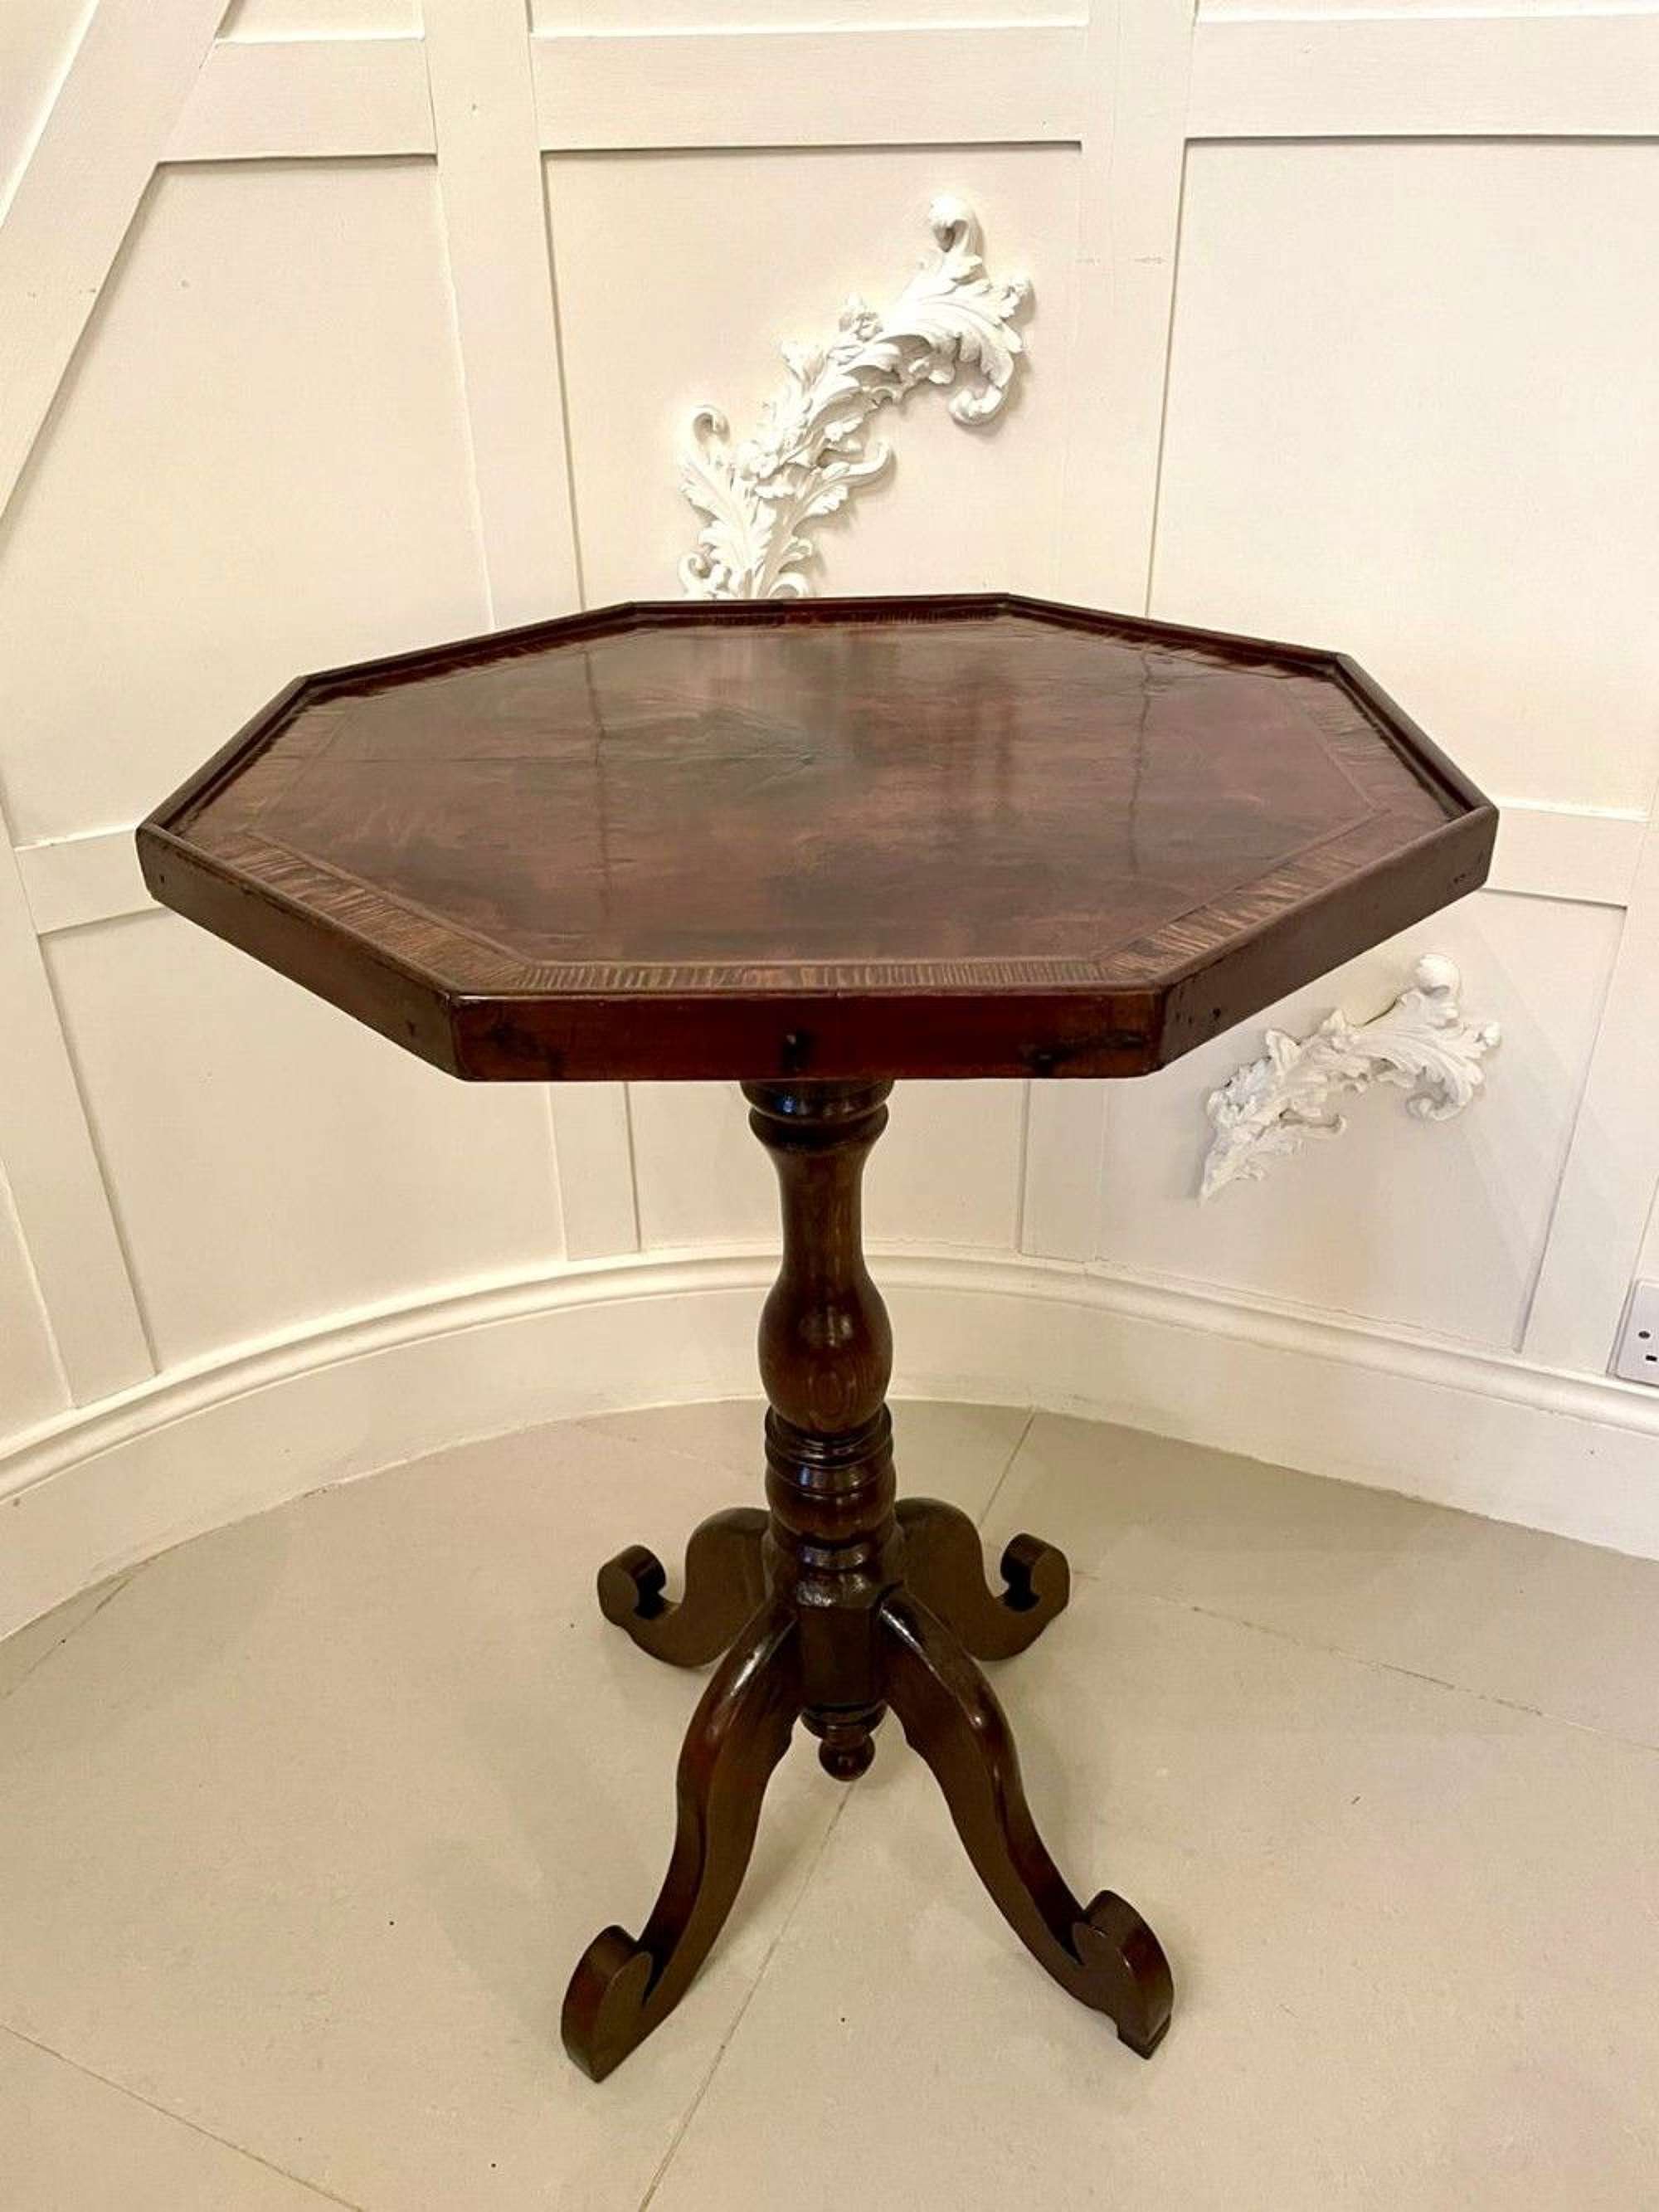 Rare New Zealand Antique Victorian Lamp Table By W H Jewell